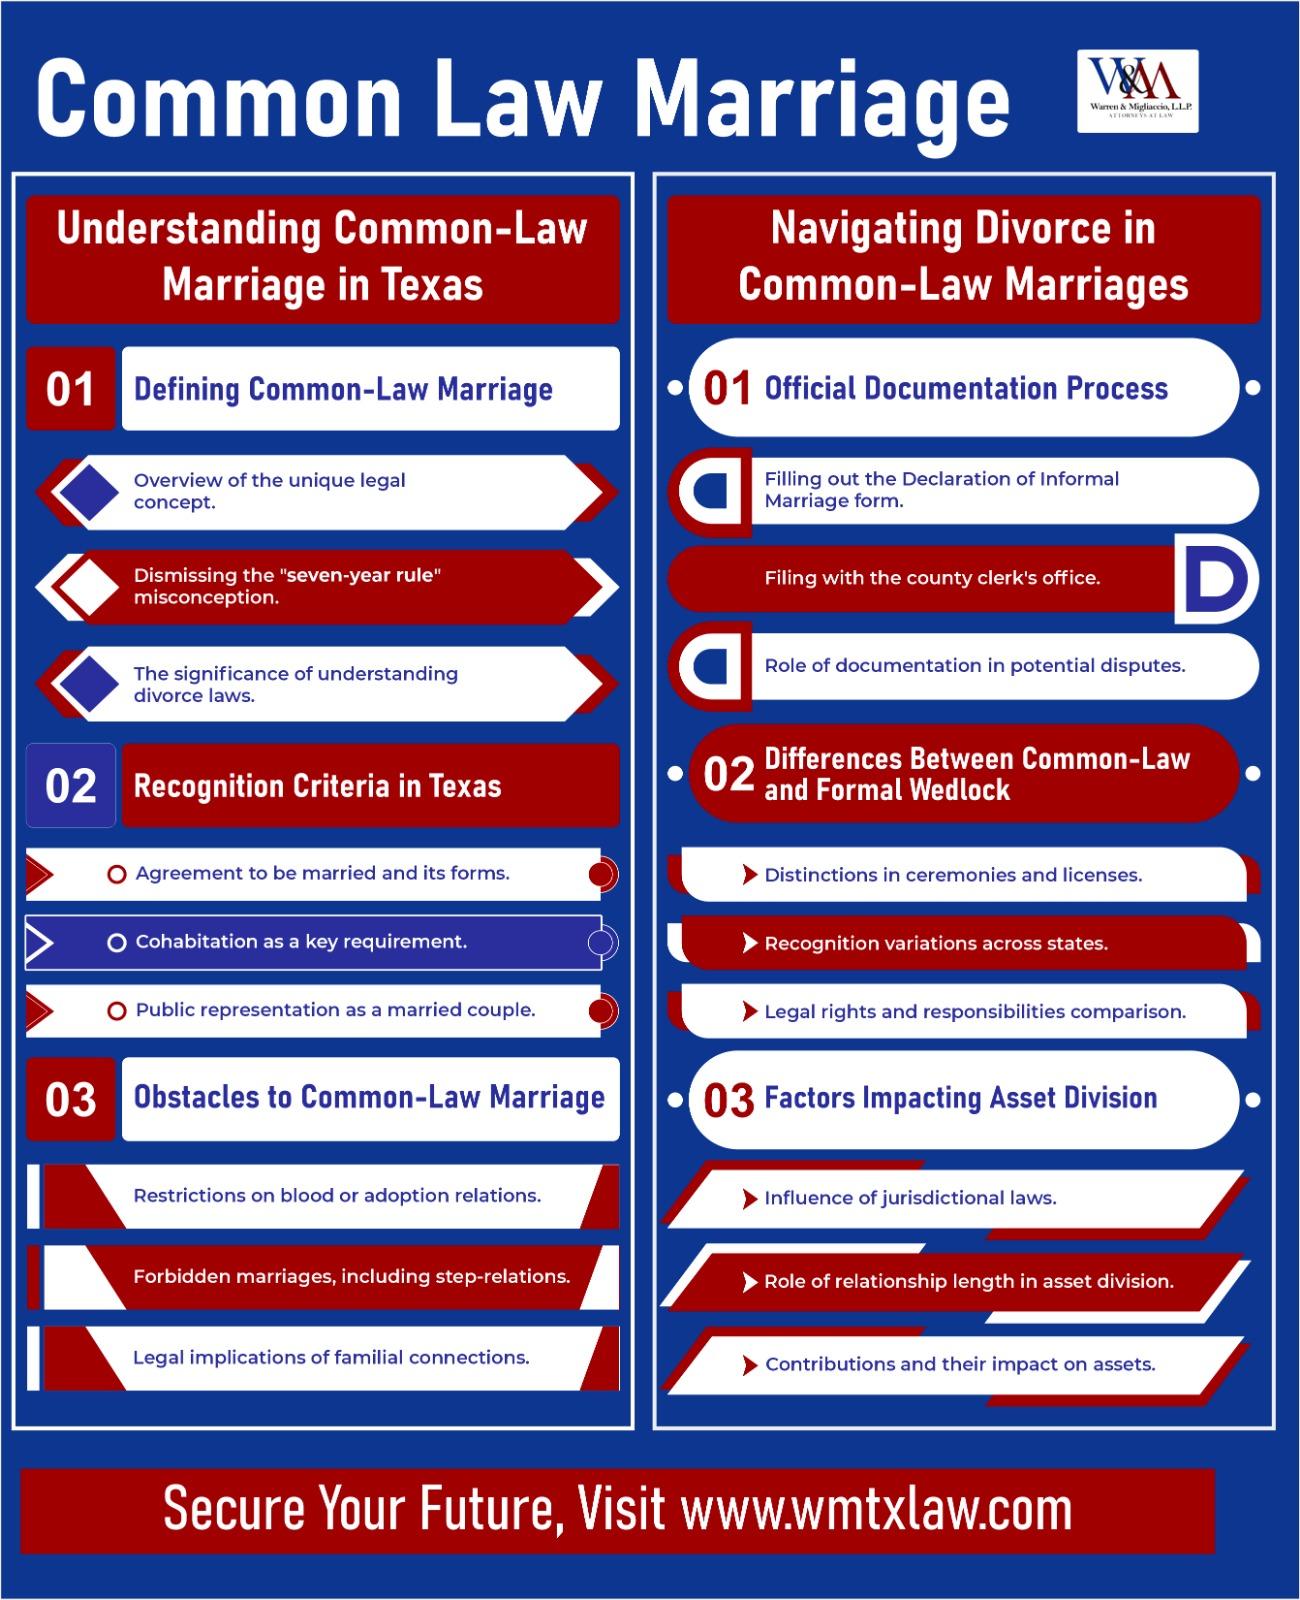 Infographic explaining common-law marriage, divorce, and marriage in Texas, with sections on legal criteria, recognition, and distinctions between common-law and formal weddings.